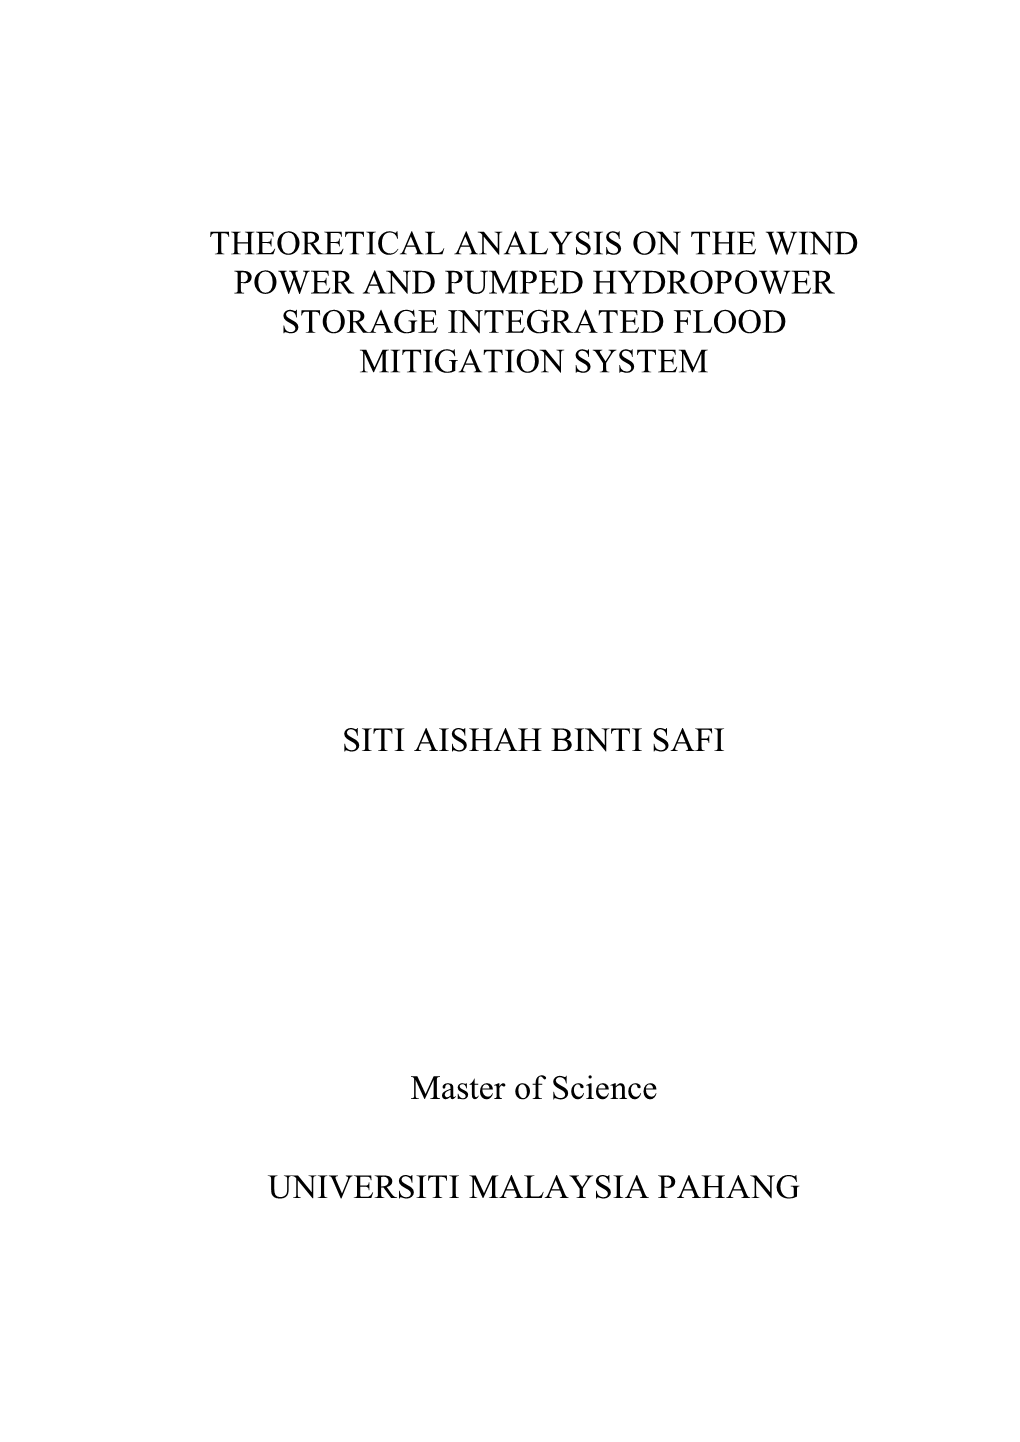 Theoretical Analysis on the Wind Power and Pumped Hydropower Storage Integrated Flood Mitigation System